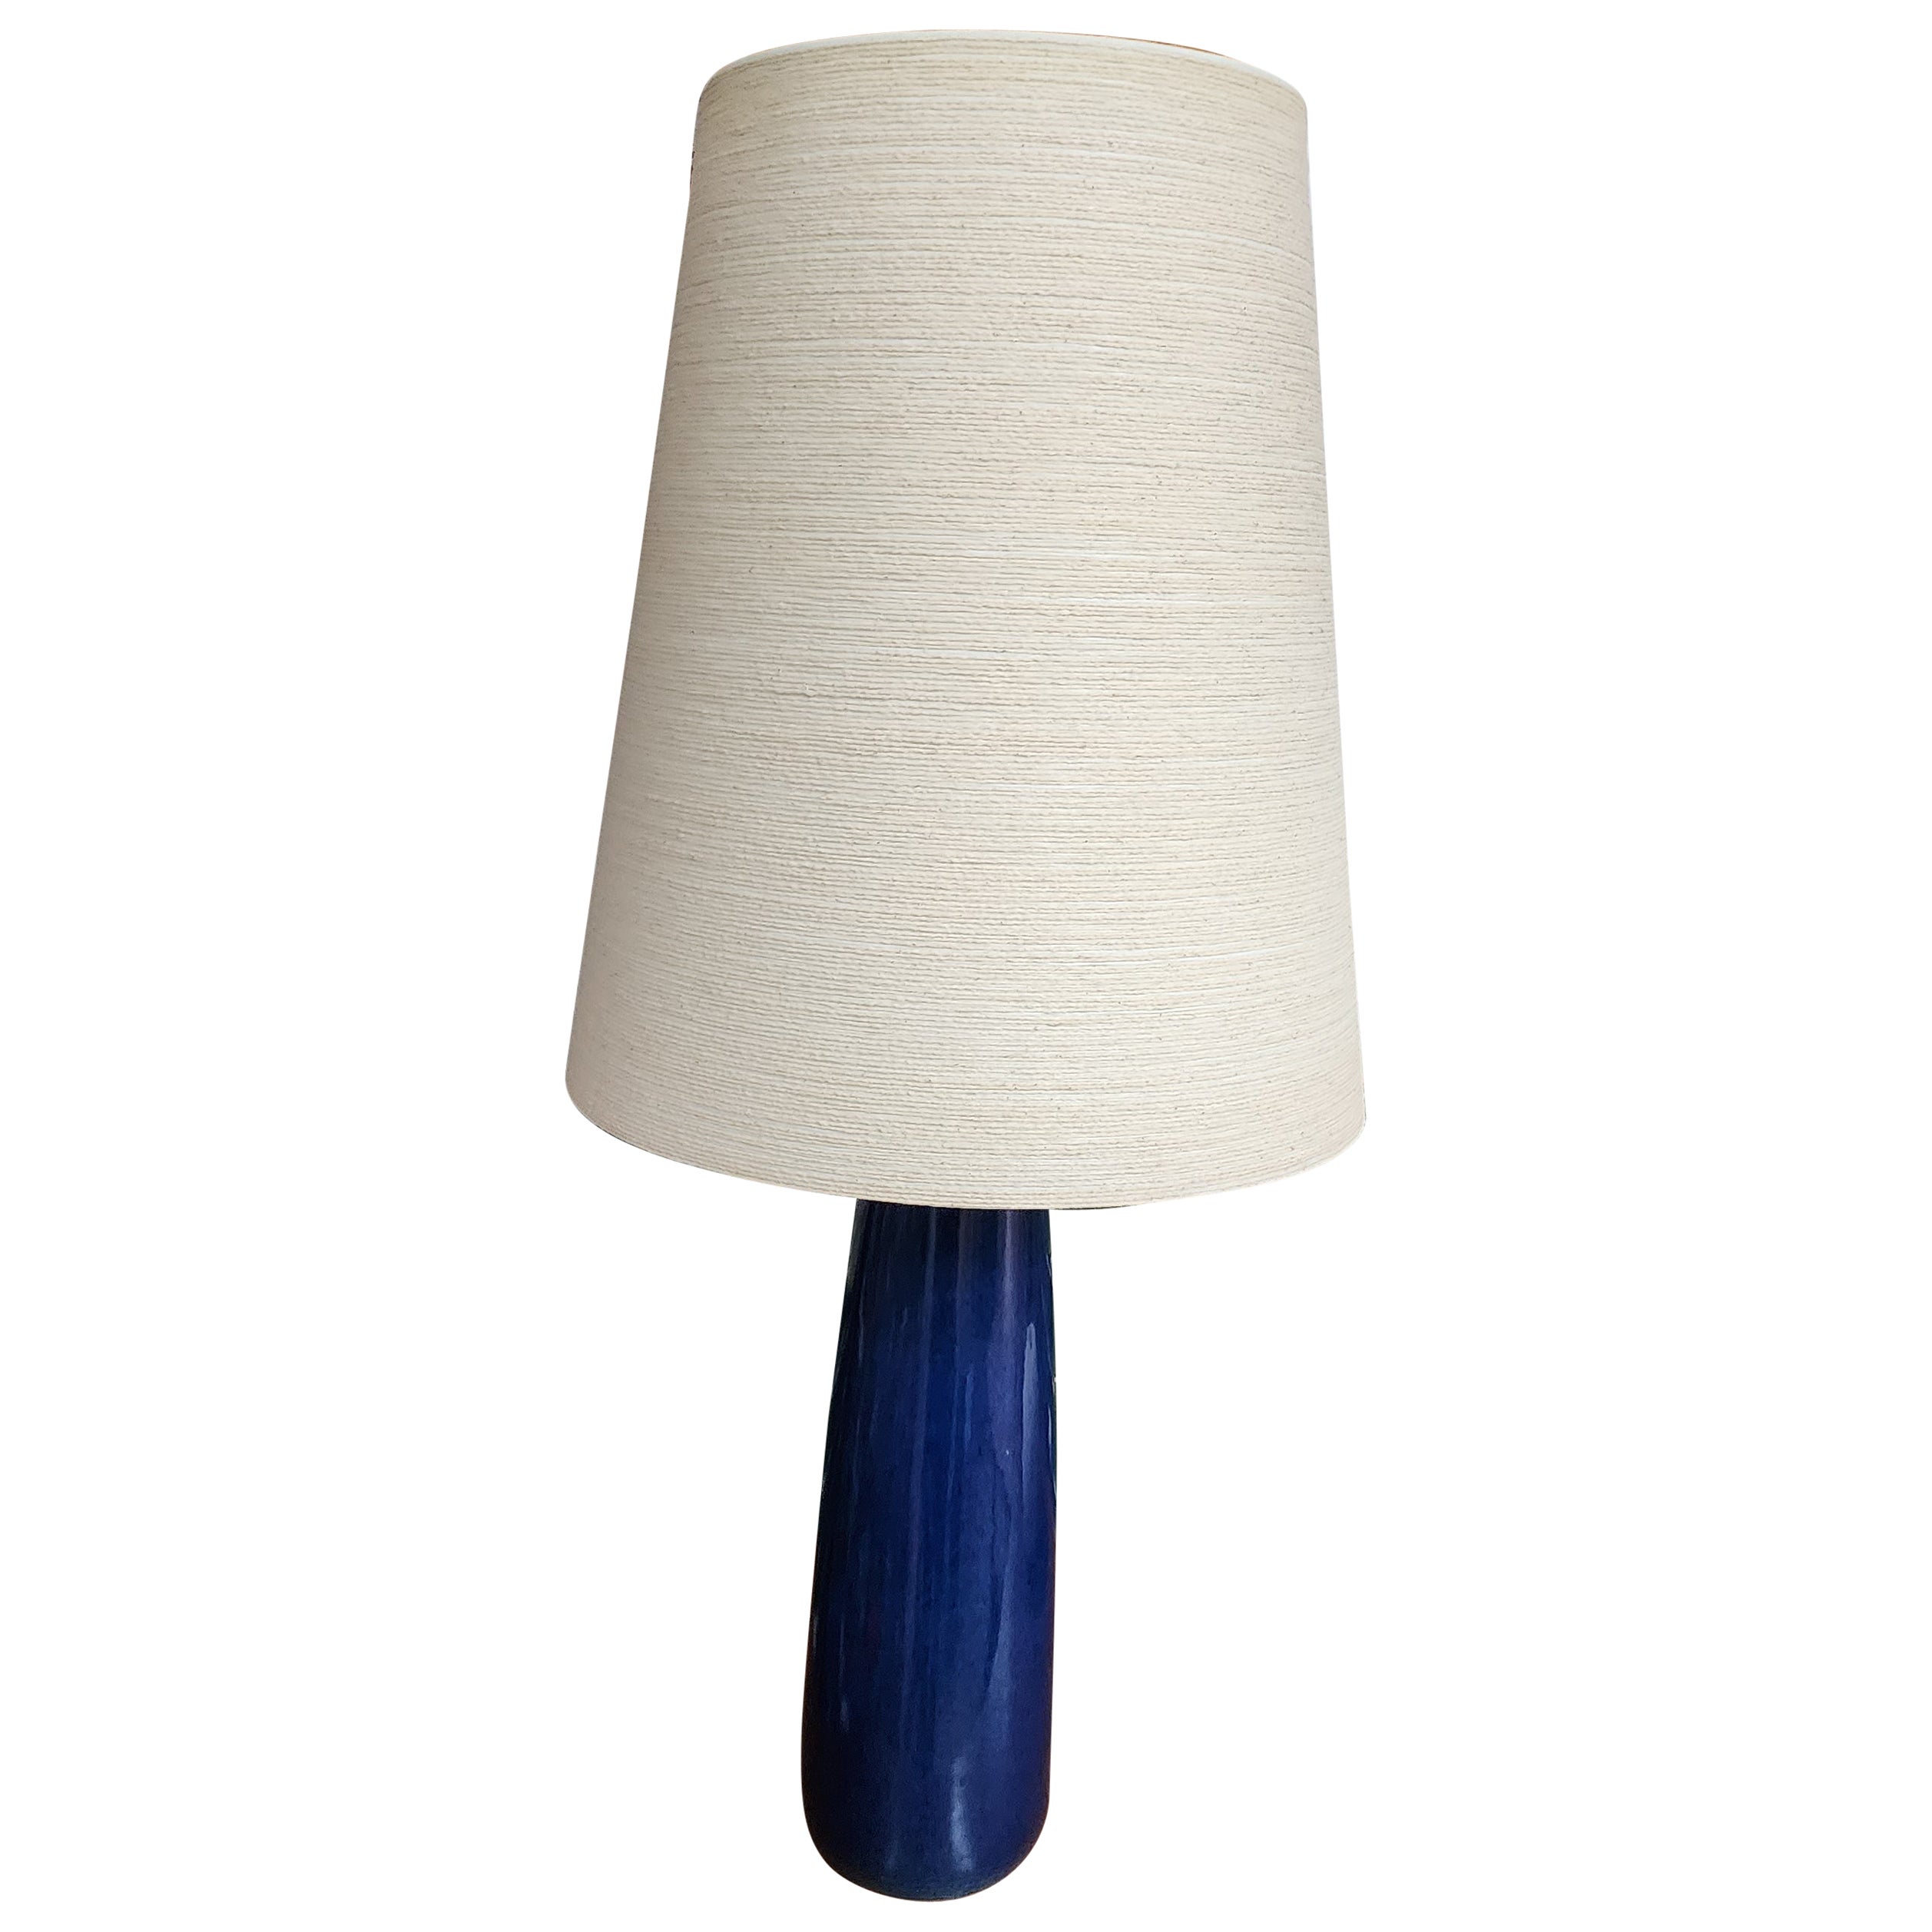 1960s Ceramic Lamp by Lotte and Gunnar Bostlund For Sale